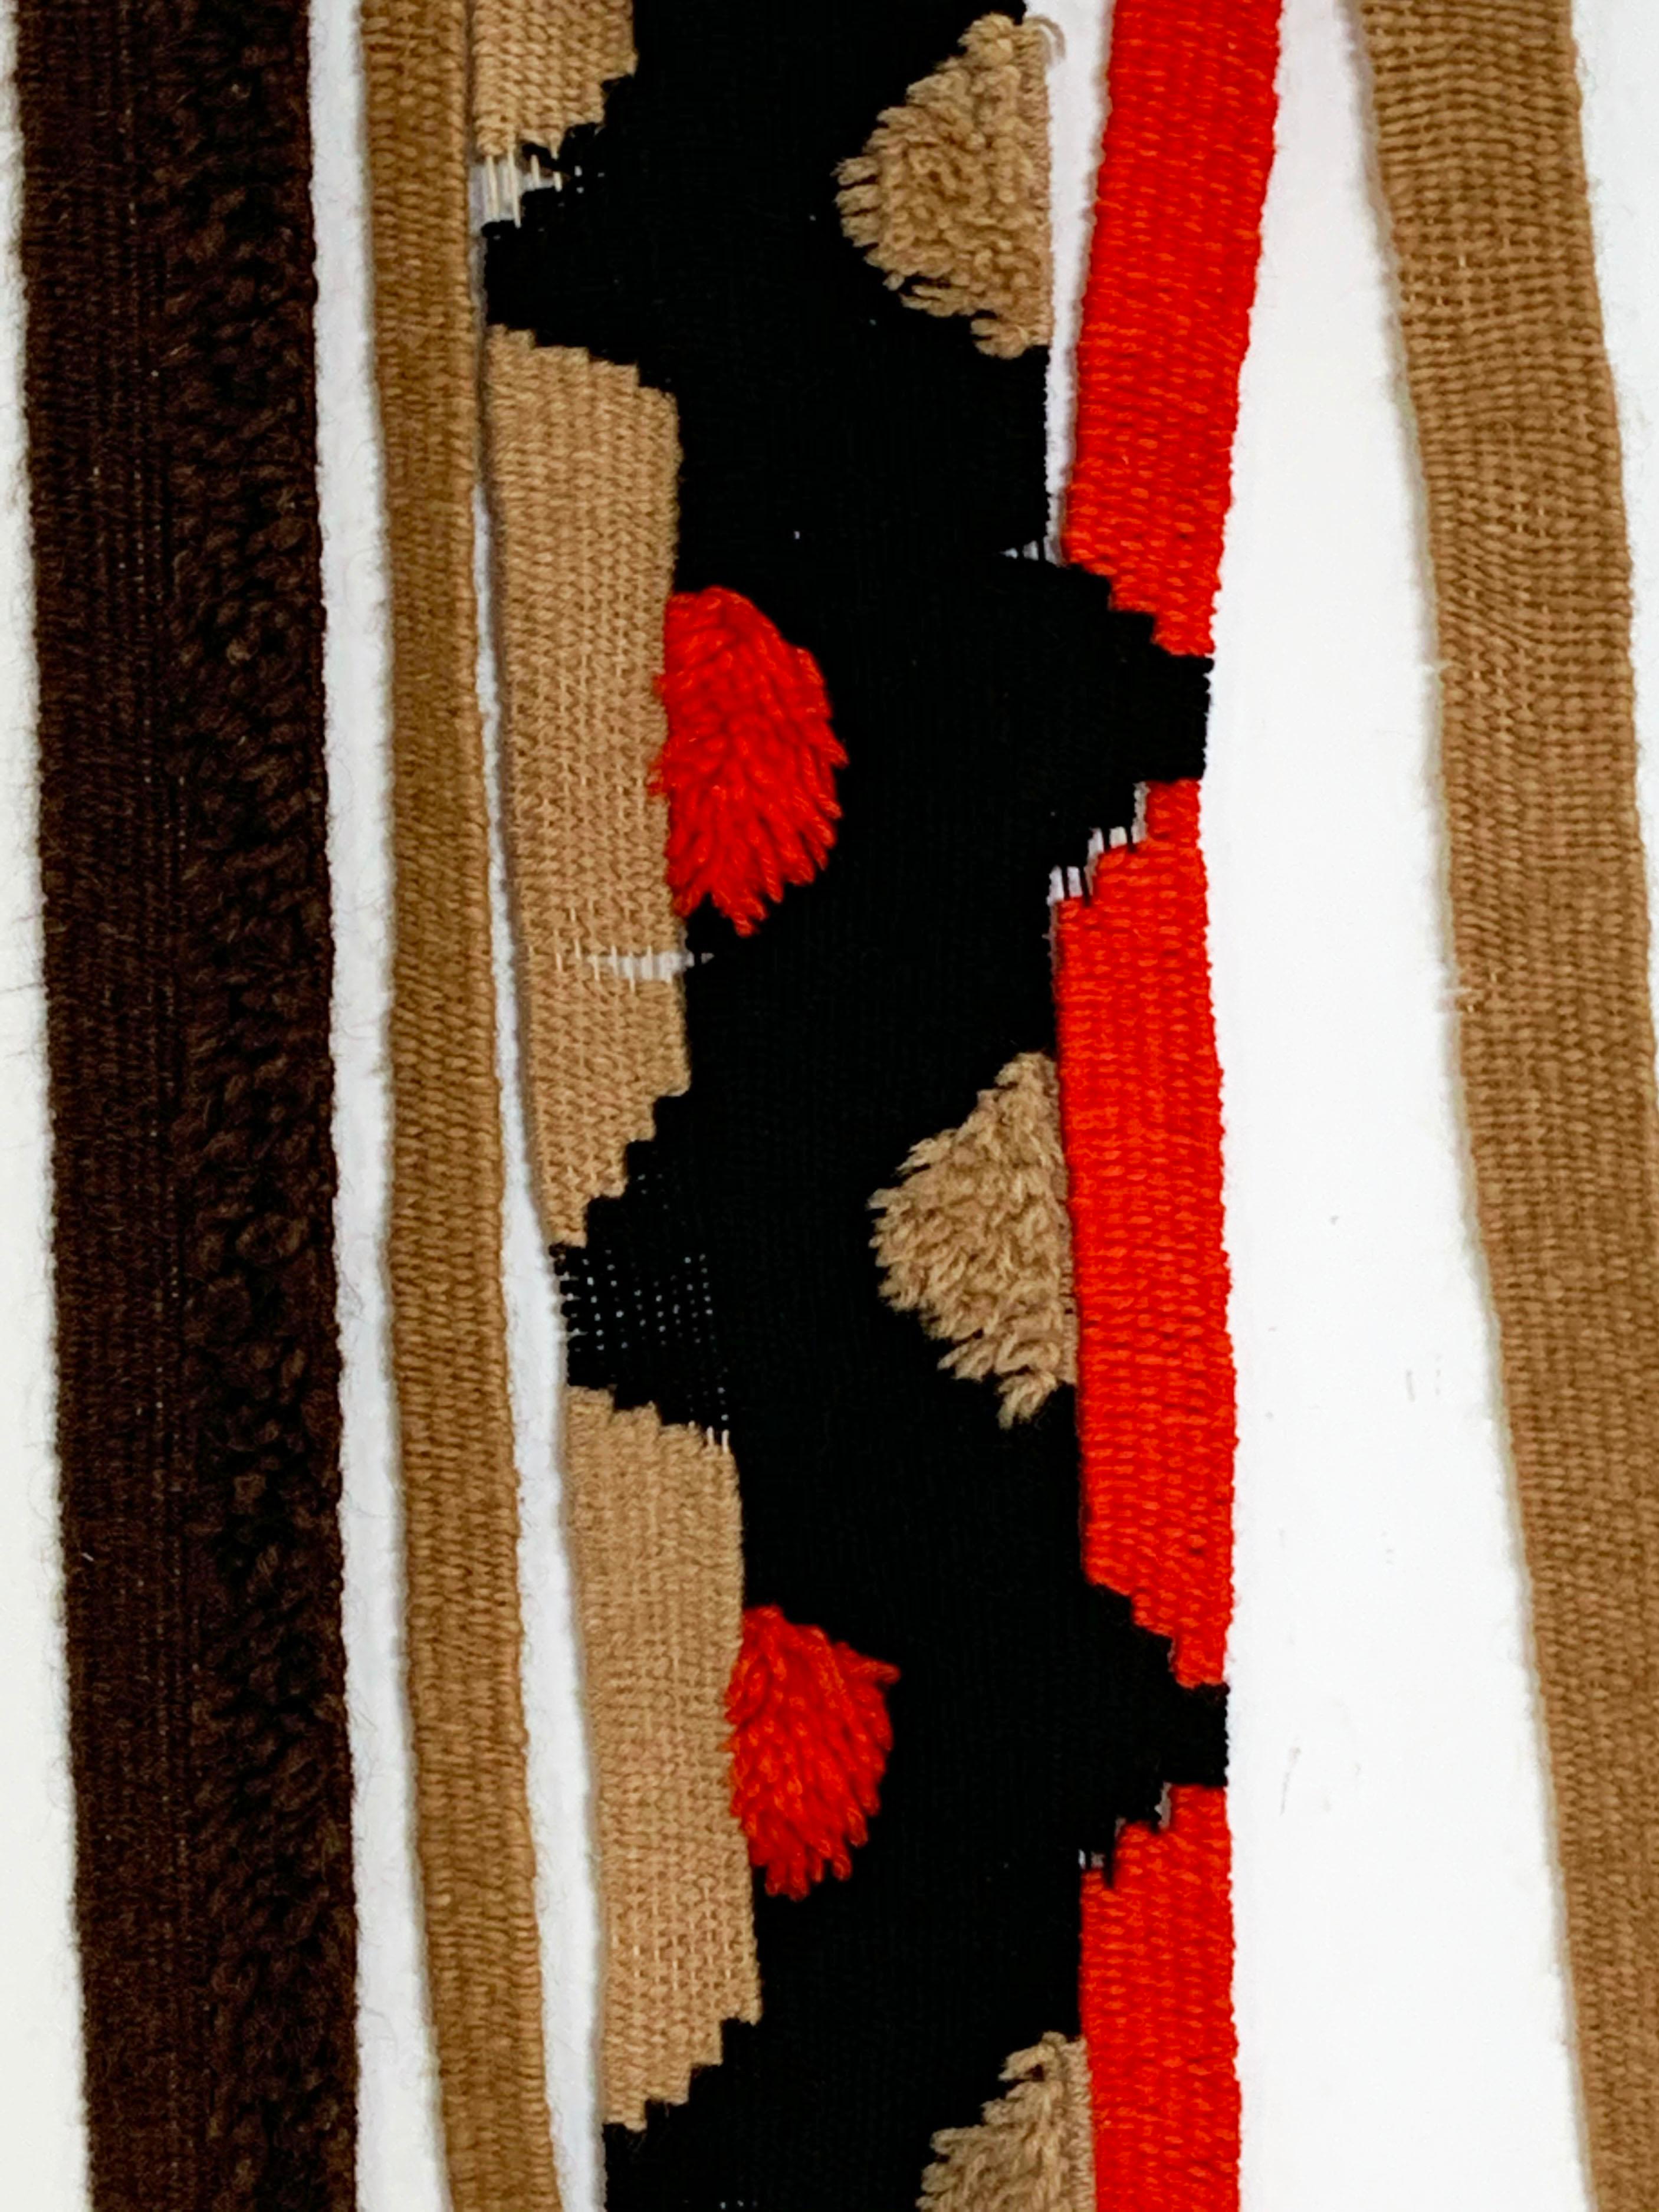 American Handmade Woven Wall Hanging Textile Art, circa 1960s For Sale